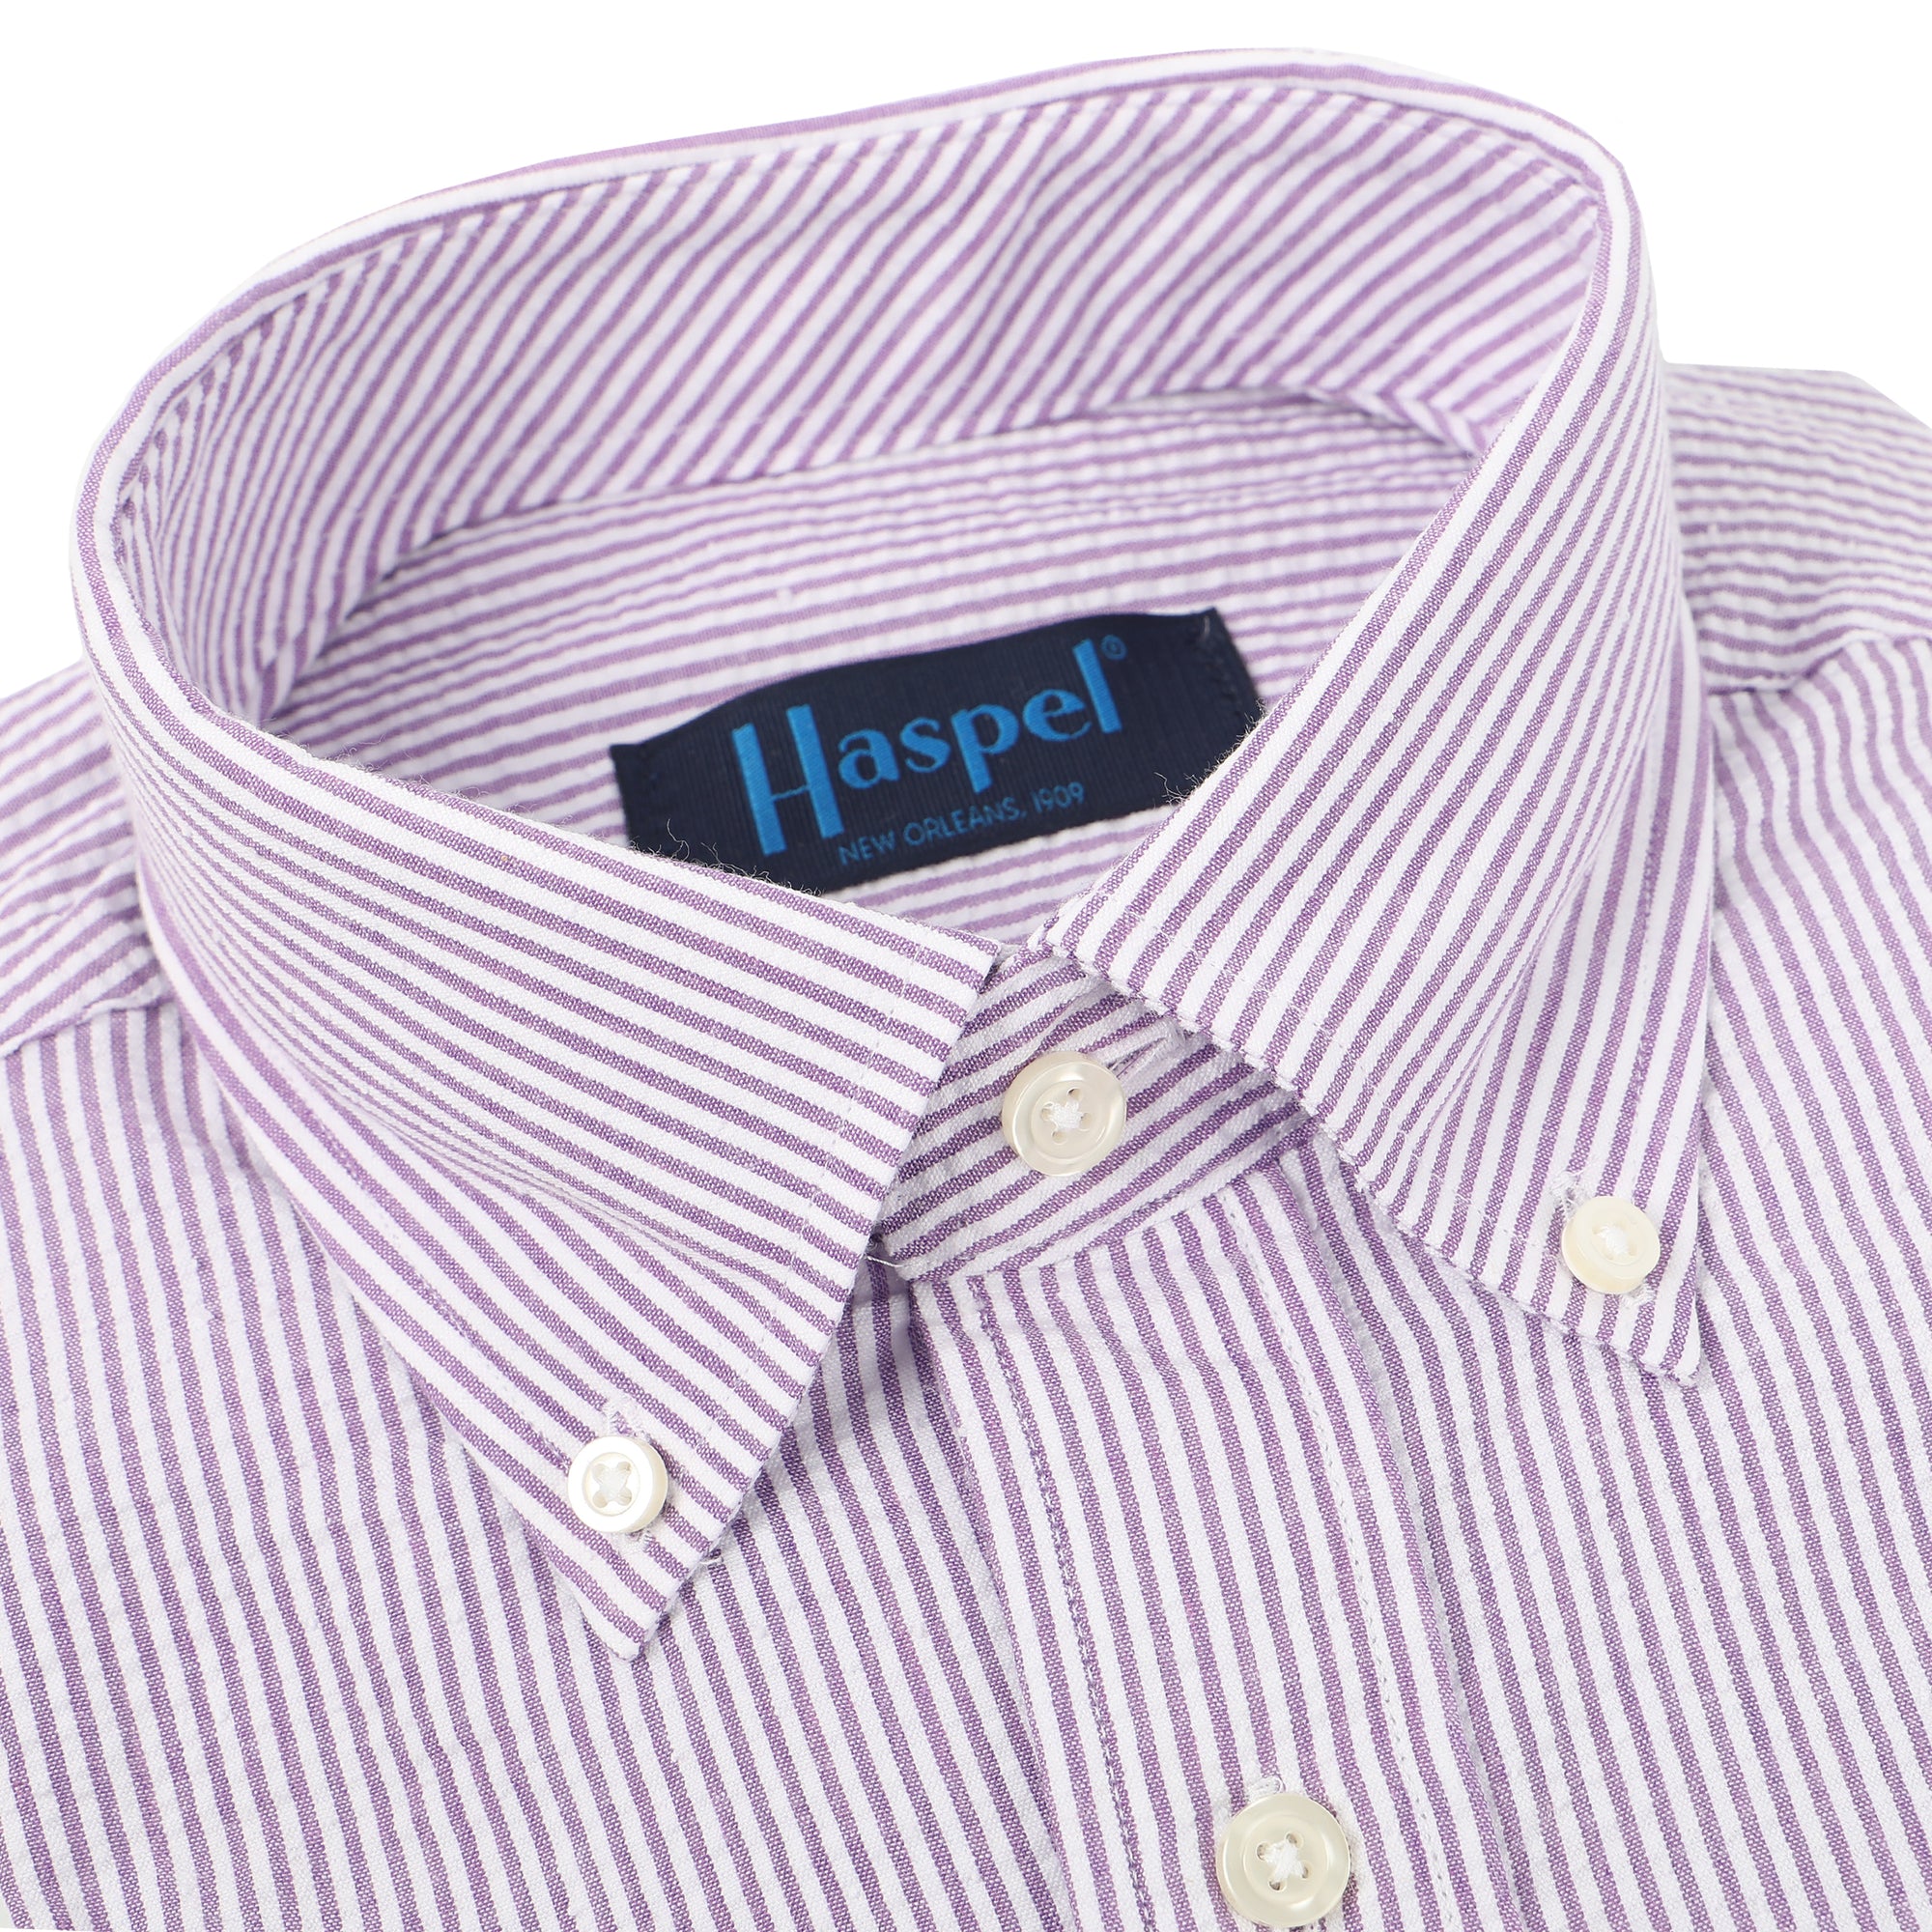 Seersucker all year long in a lavender purple seersucker shirt. Subtle, lightweight, and a texture they begs a second look.  100% Cotton Seersucker • Spread Collar • Short Sleeve • Chest Pocket • Machine Washable • Made in Italy 